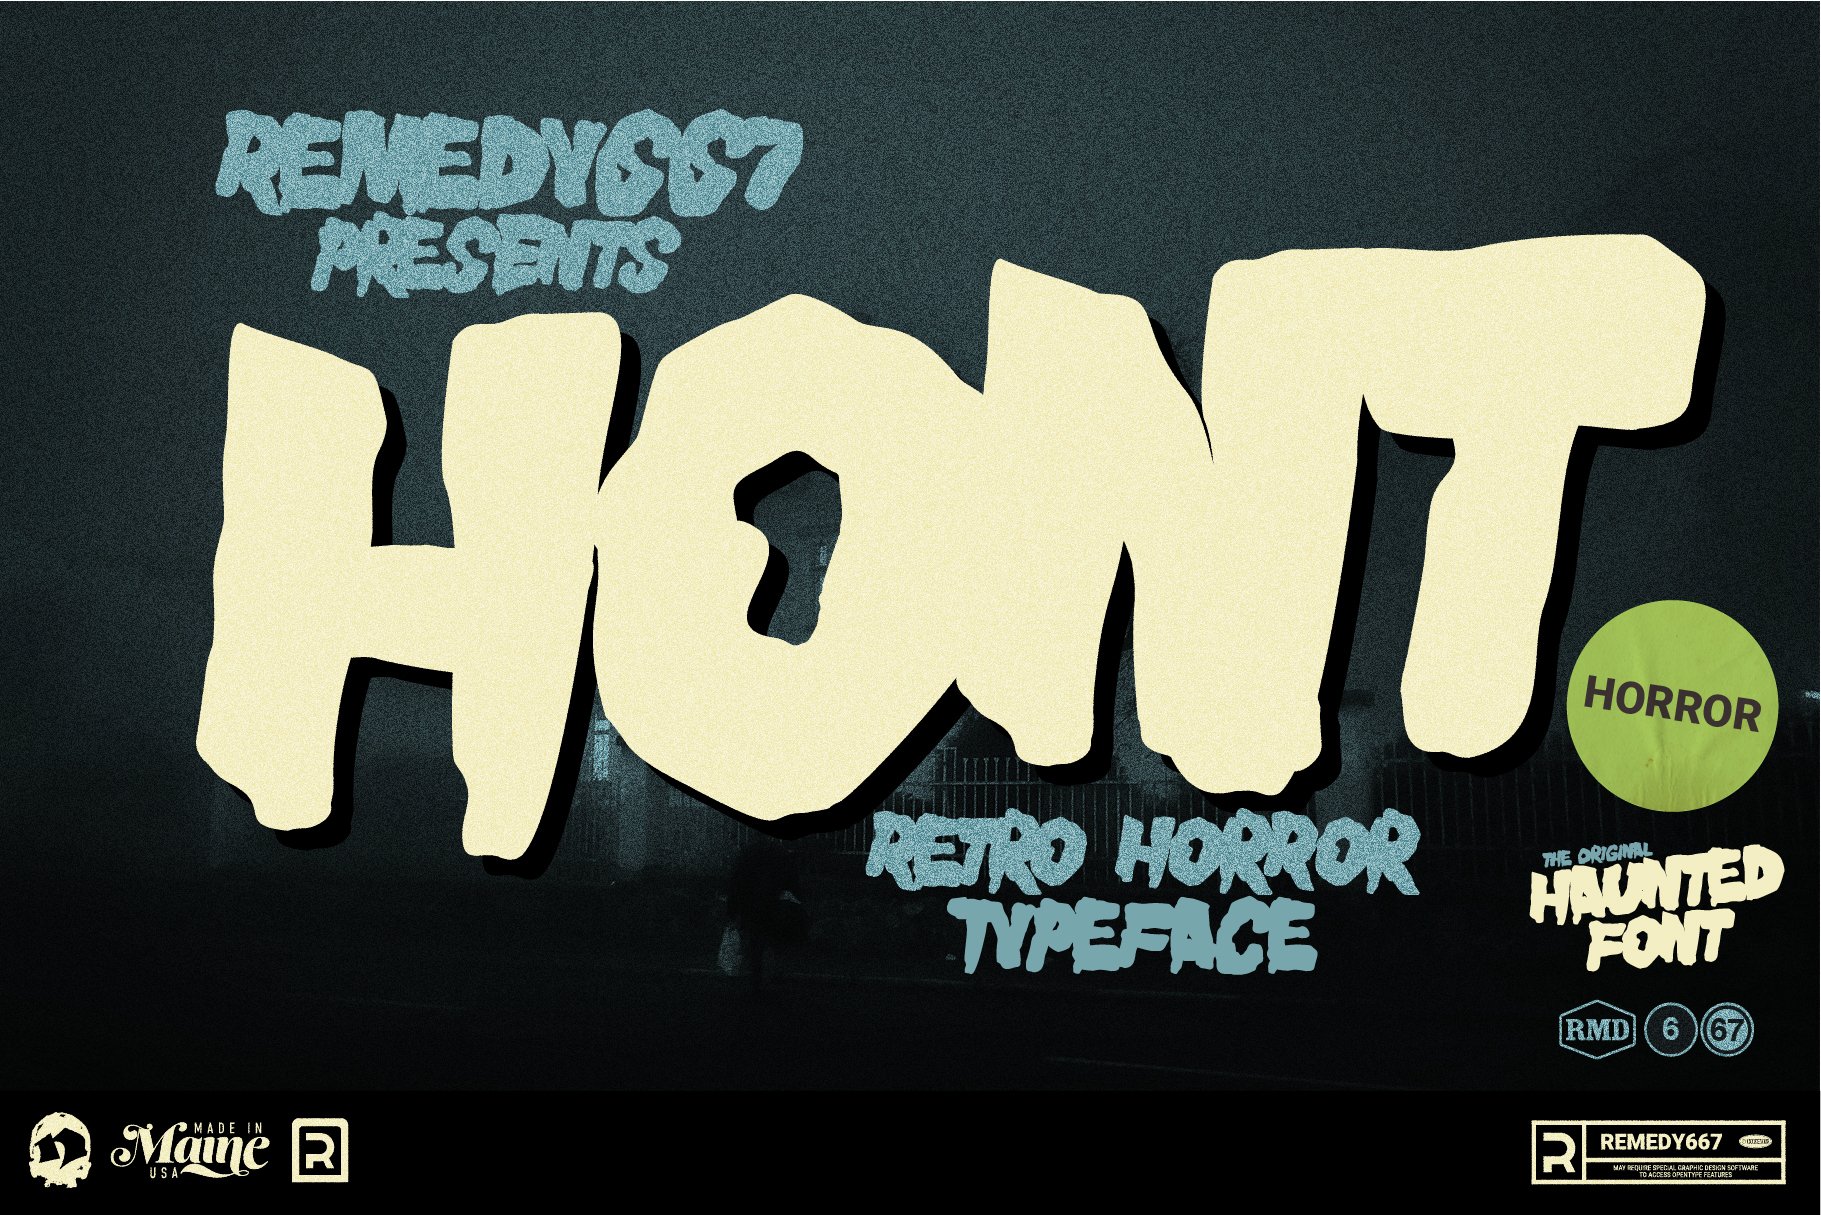 Hont - The Original Haunted Font cover image.